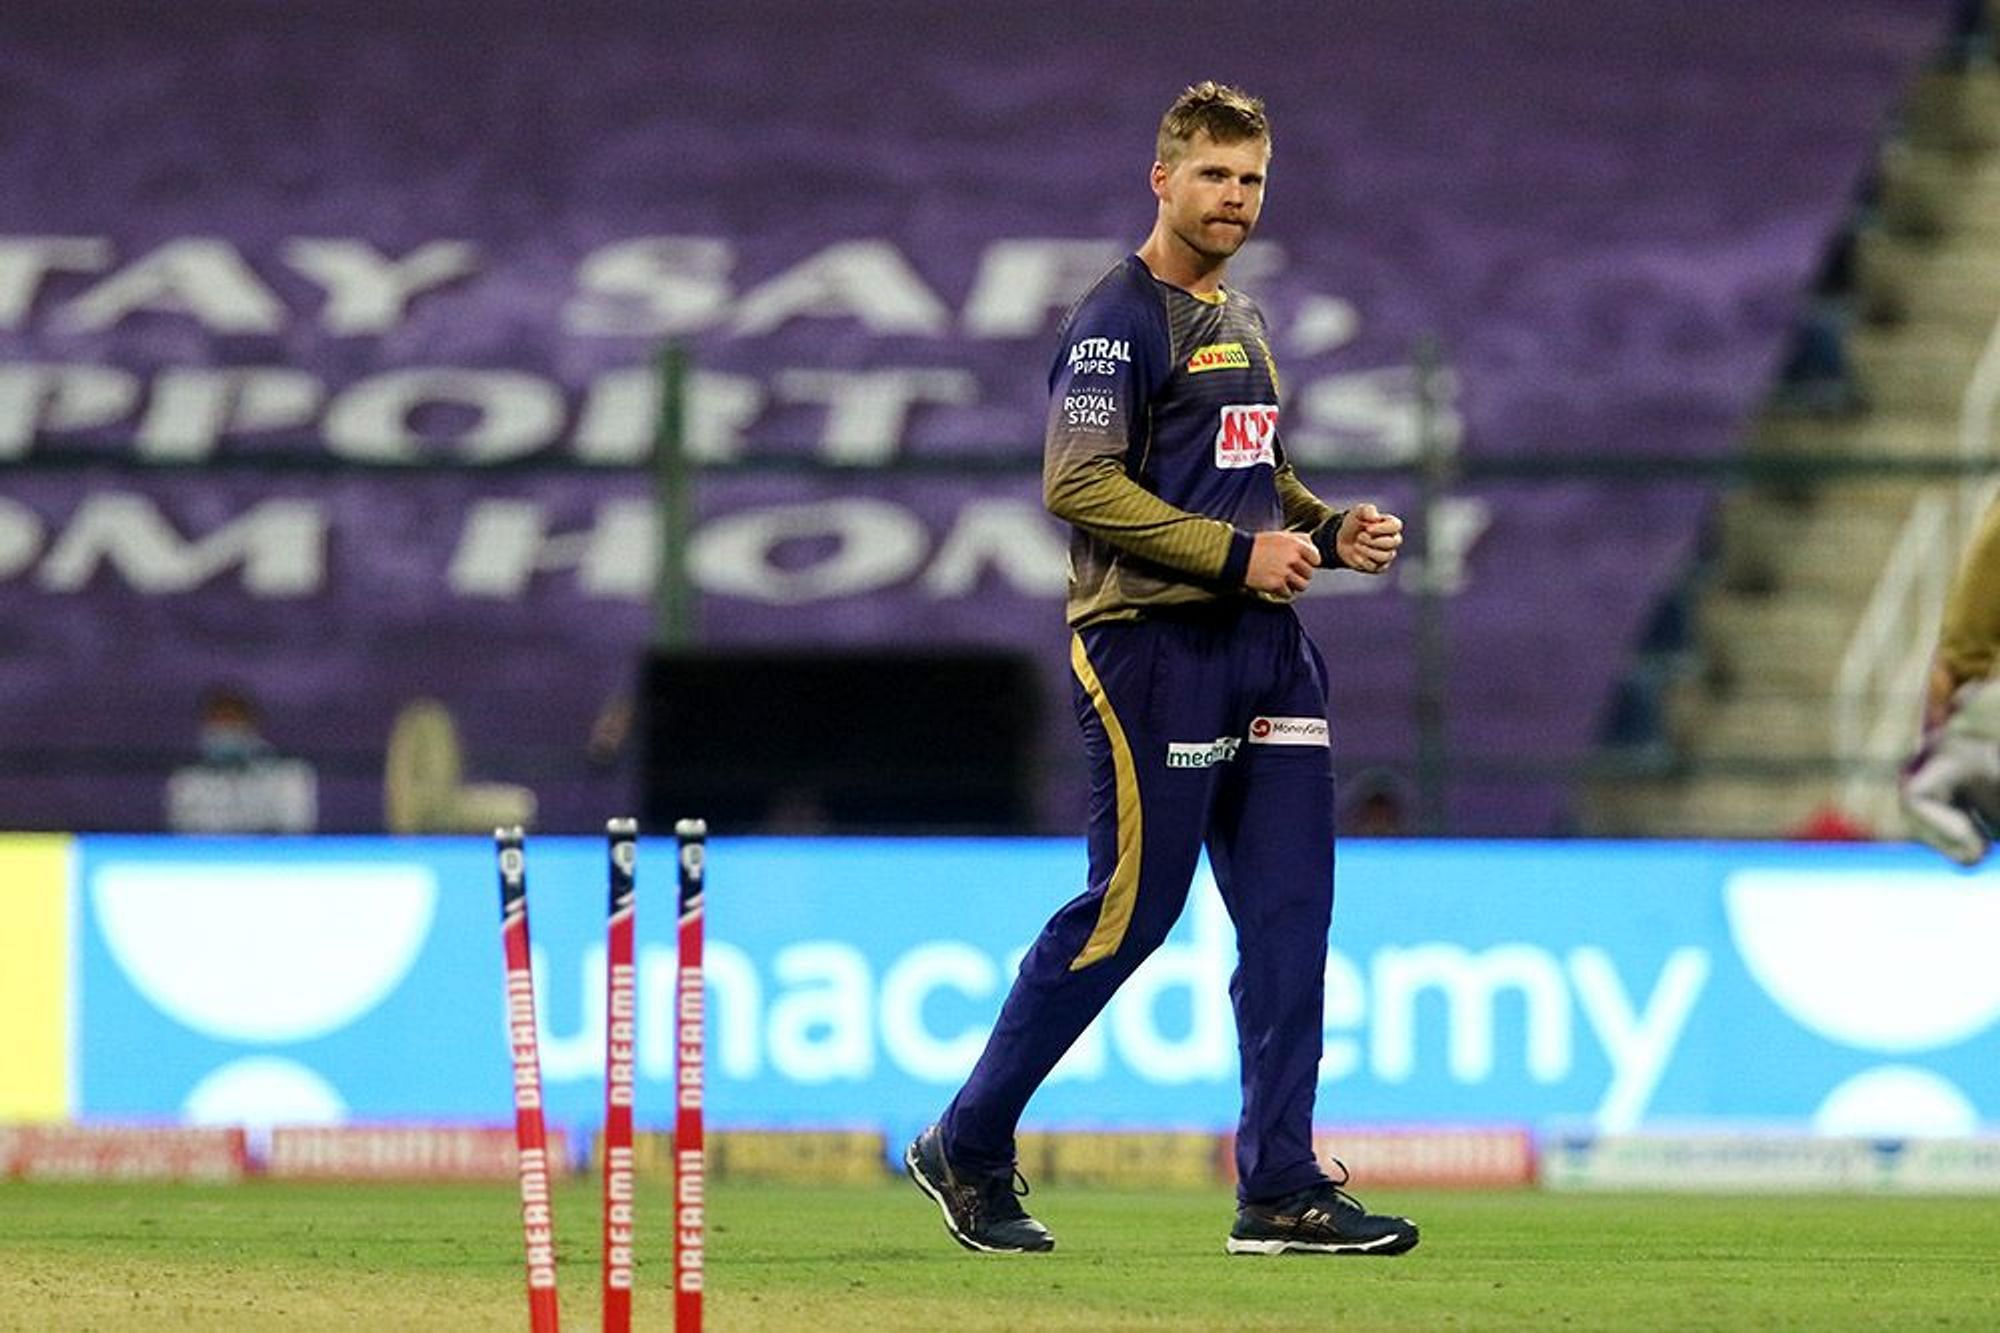 KKR bowler Lockie Ferguson made the difference in the match. Credit: iplt20.com, BCCI